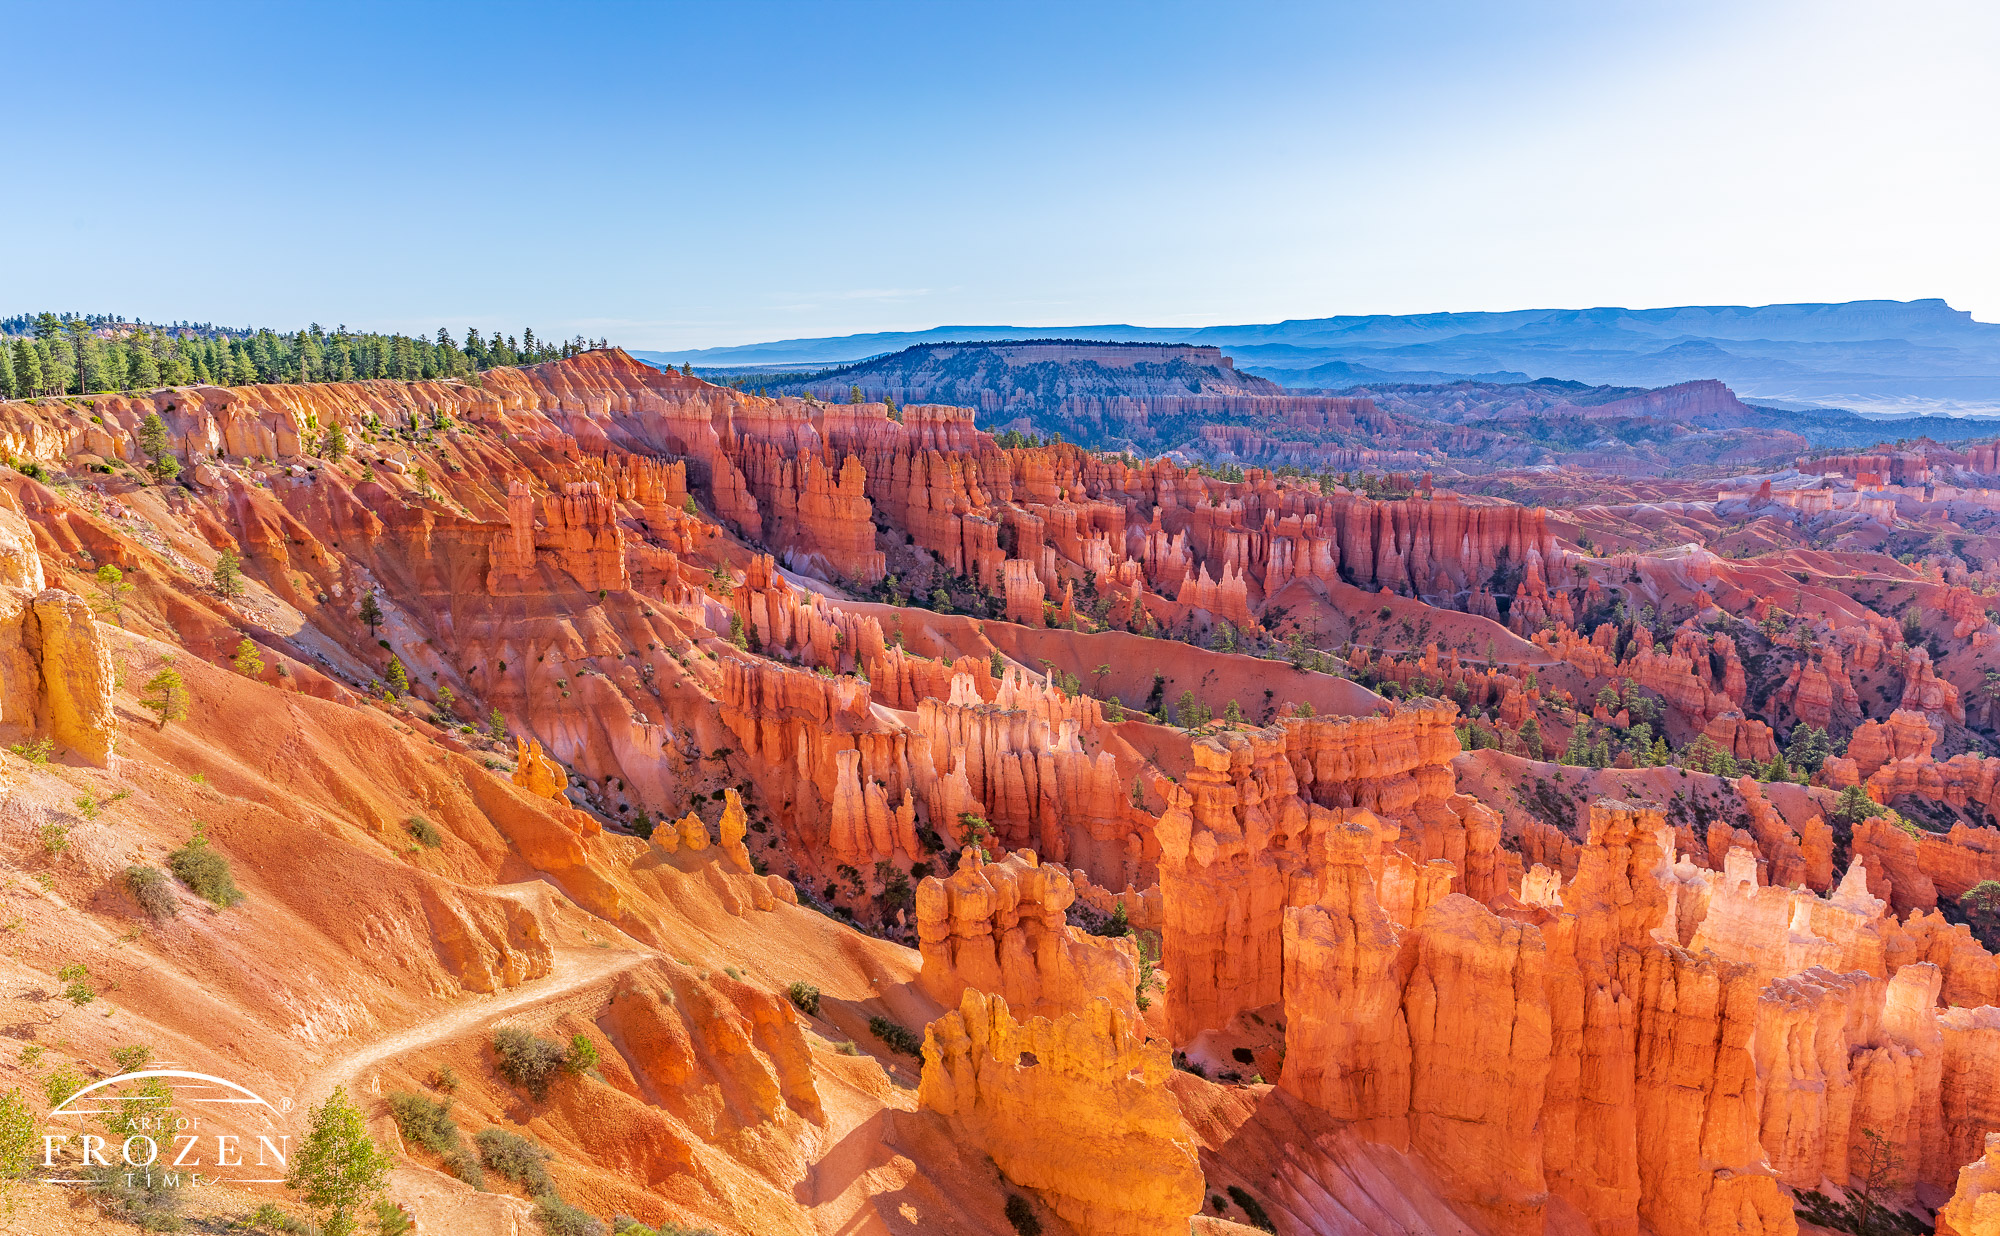 A wind angle view of Bryce Canyon capturing the vastness of the natural amphitheater as seen from the canyon rim during a summer sunrise